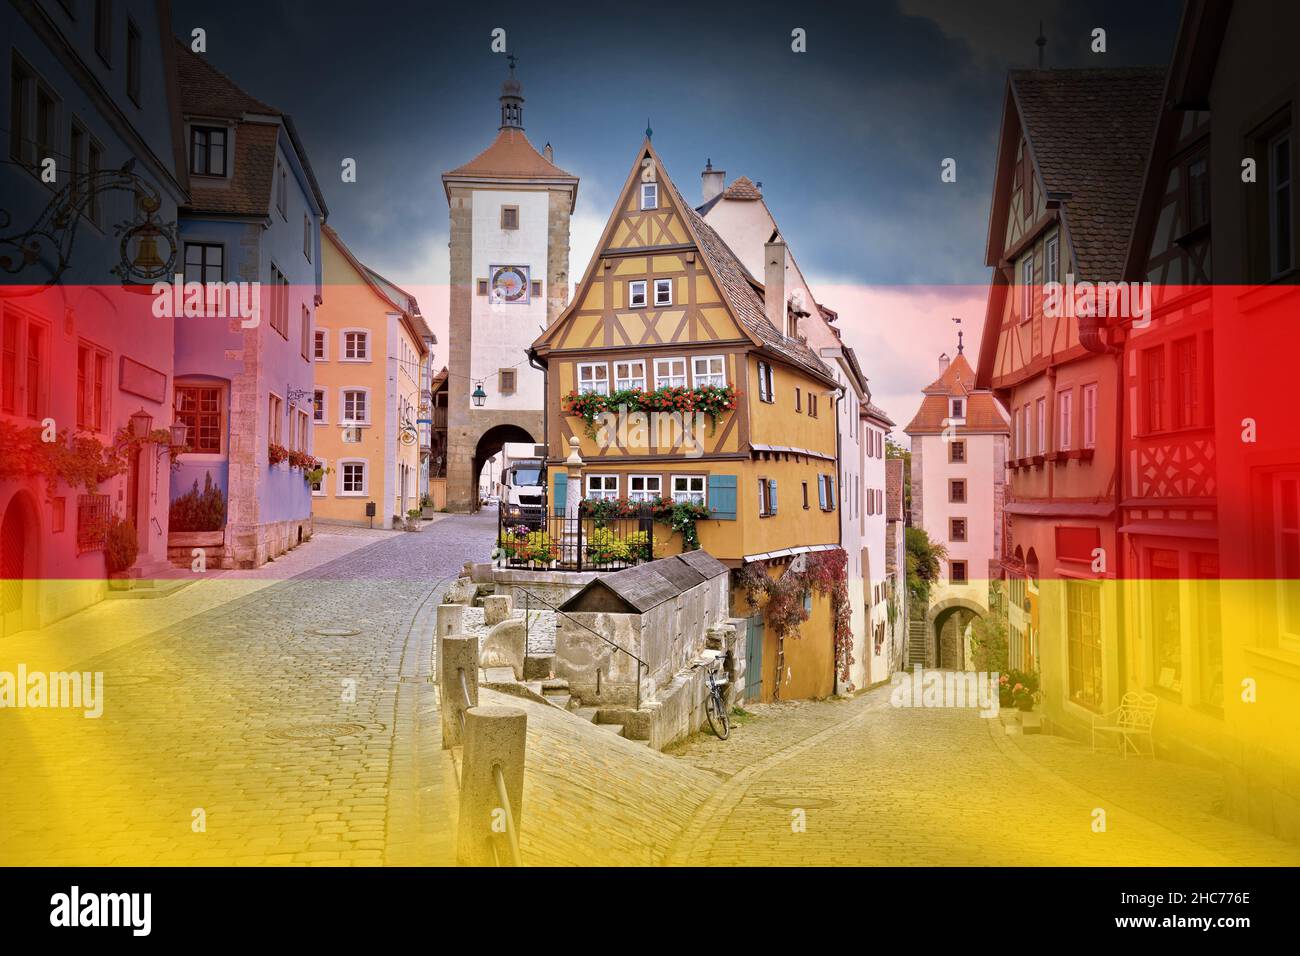 Cobbled street and architecture of historic town of Rothenburg ob der Tauber on German flag overlay view, Romantic road of Bavaria region of Germany Stock Photo